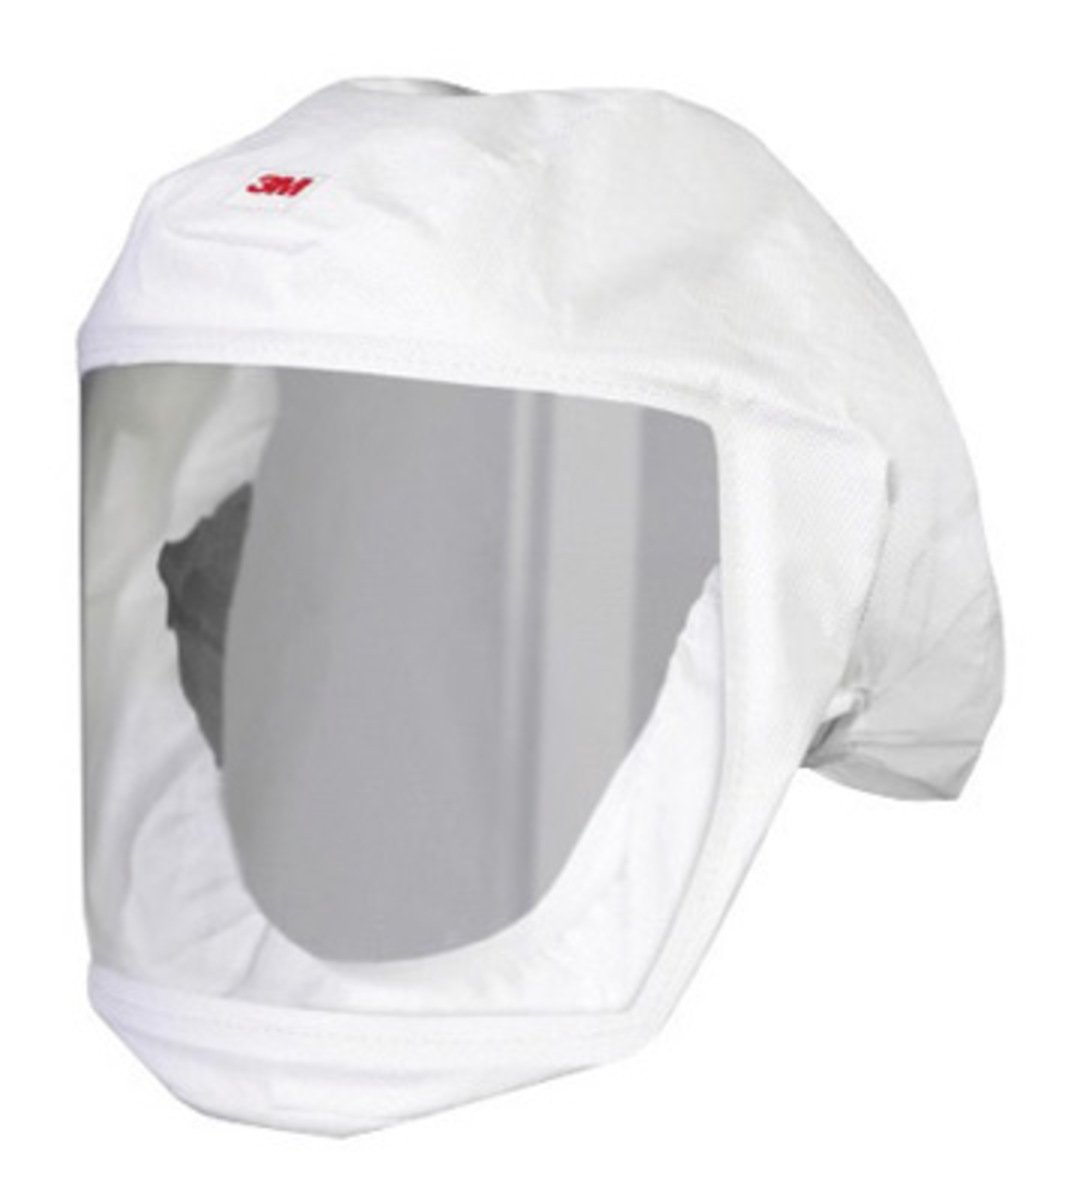 3M™ Medium/Large Polypropylene S-Series Versaflo™ White Headcover With Integrated Head Suspension (For Use With Certain 3M™ Powe